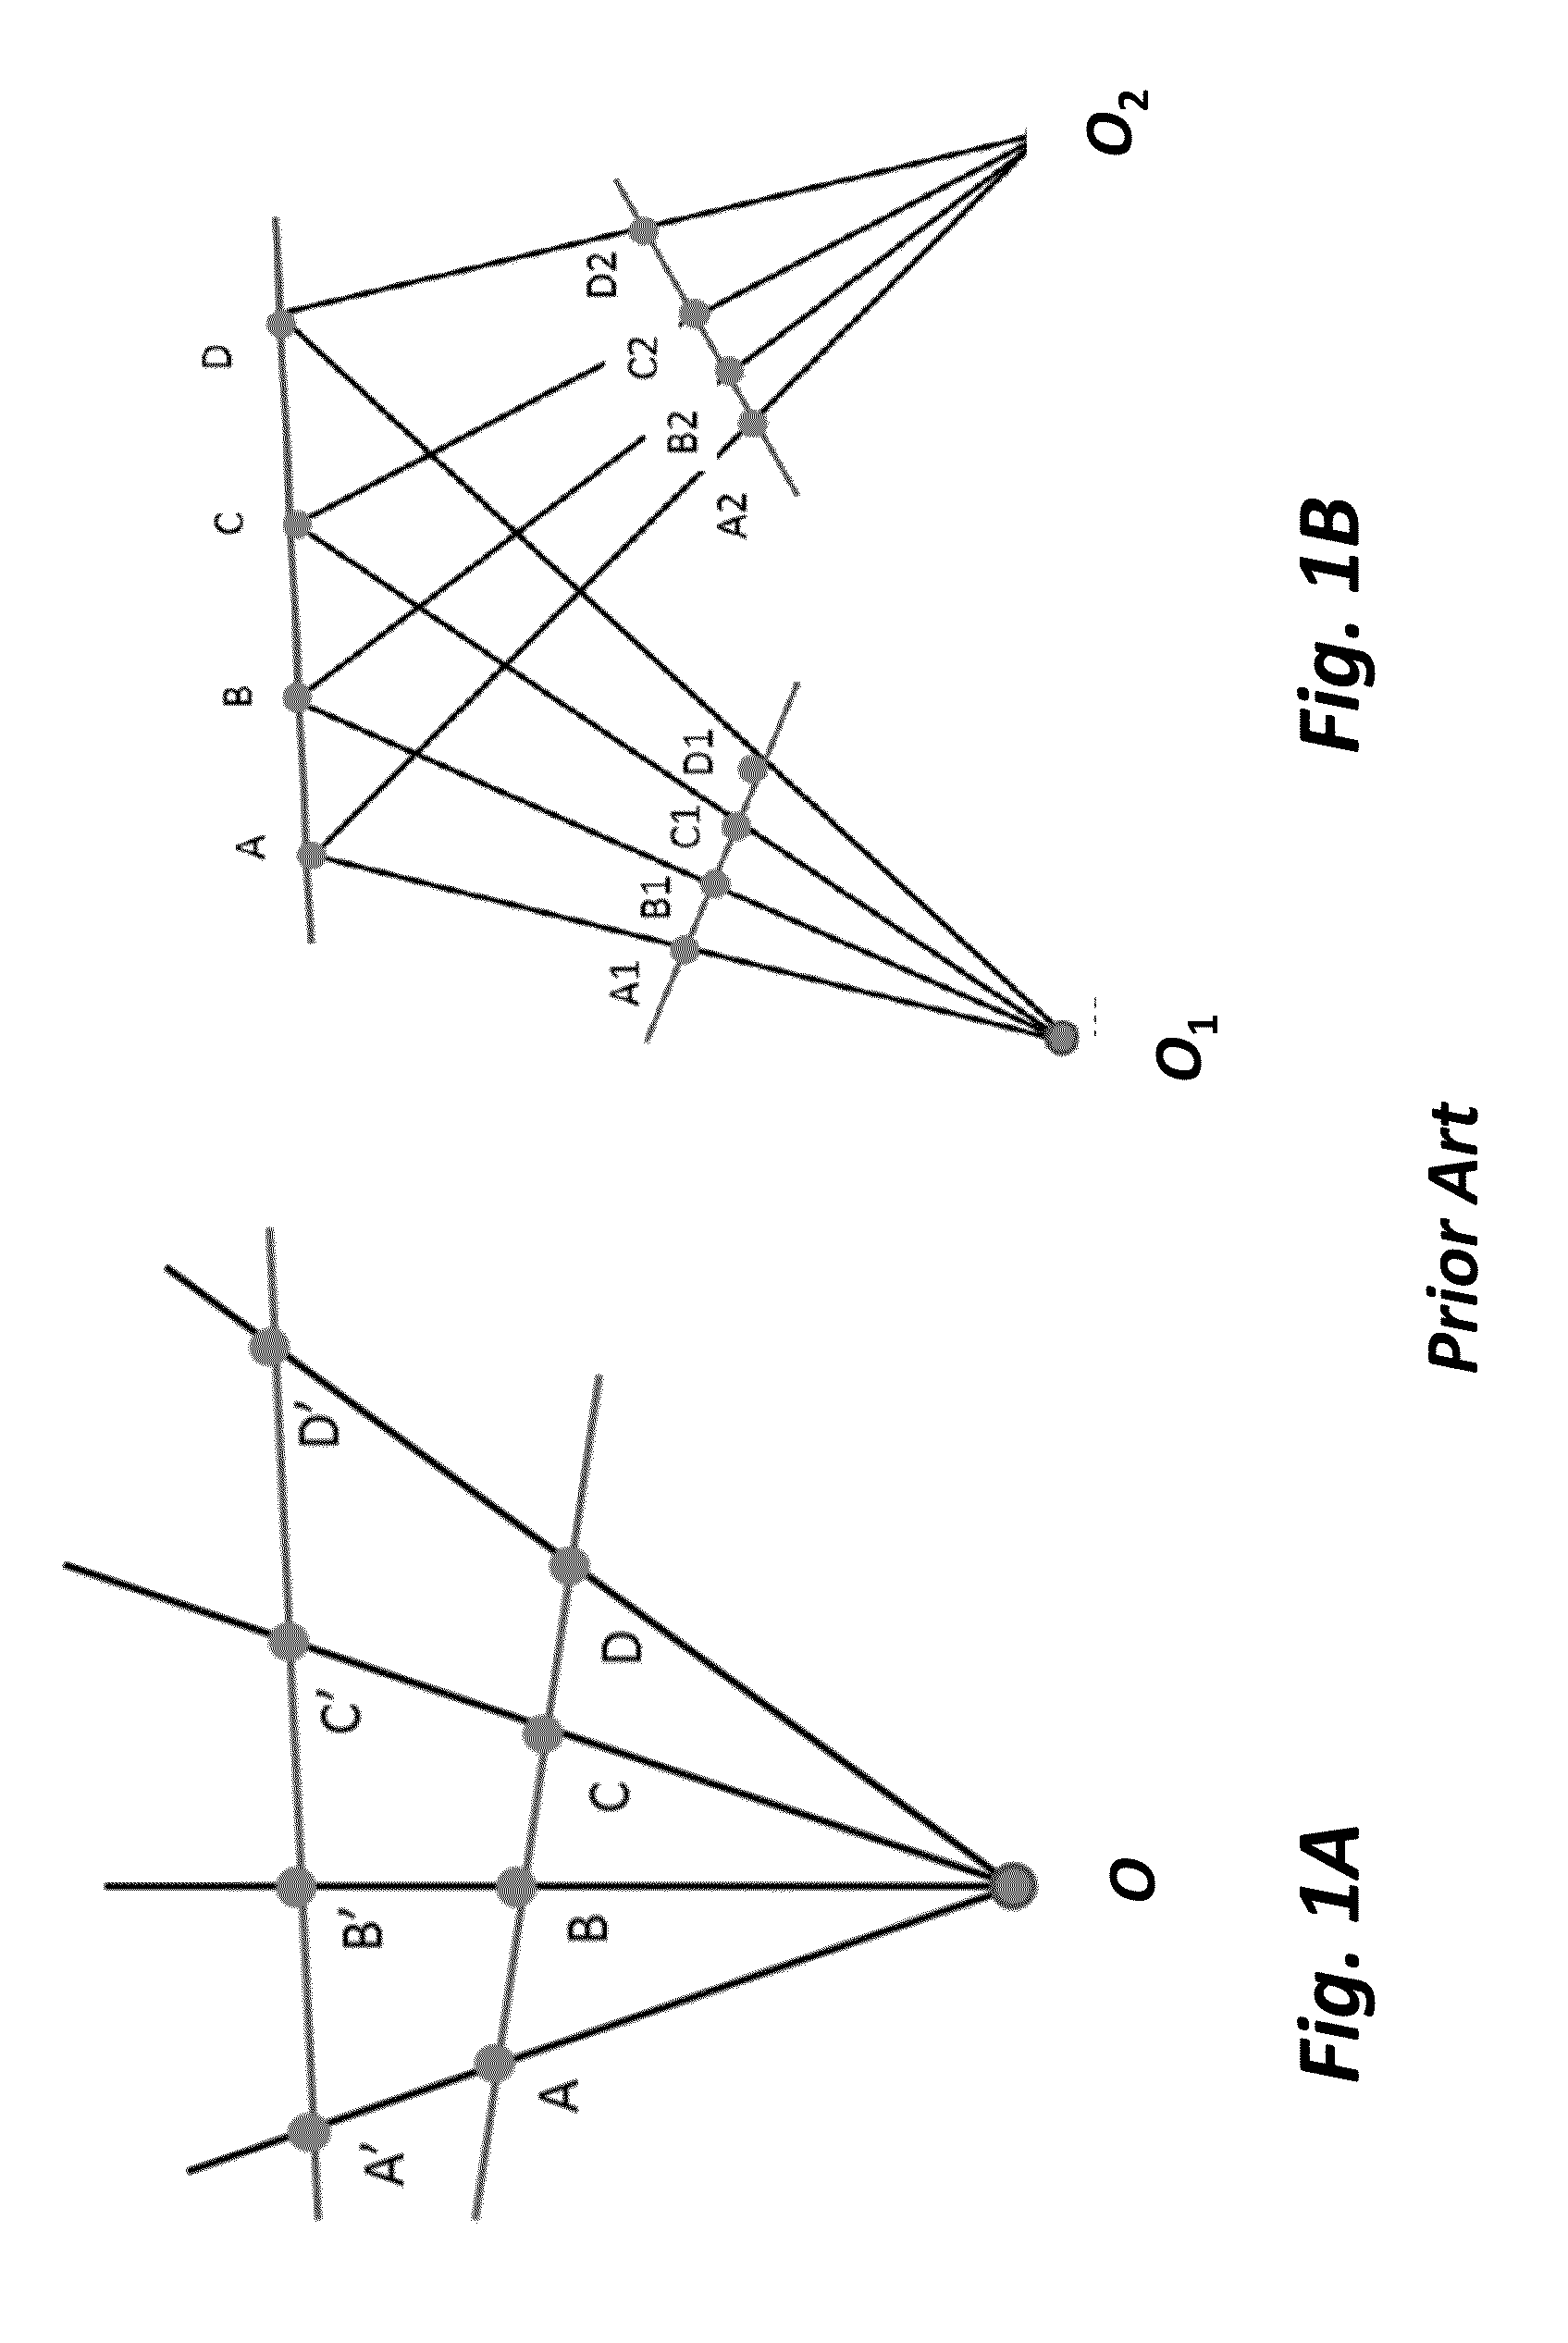 Method for 3D Scene Reconstruction with Cross-Constrained Line Matching